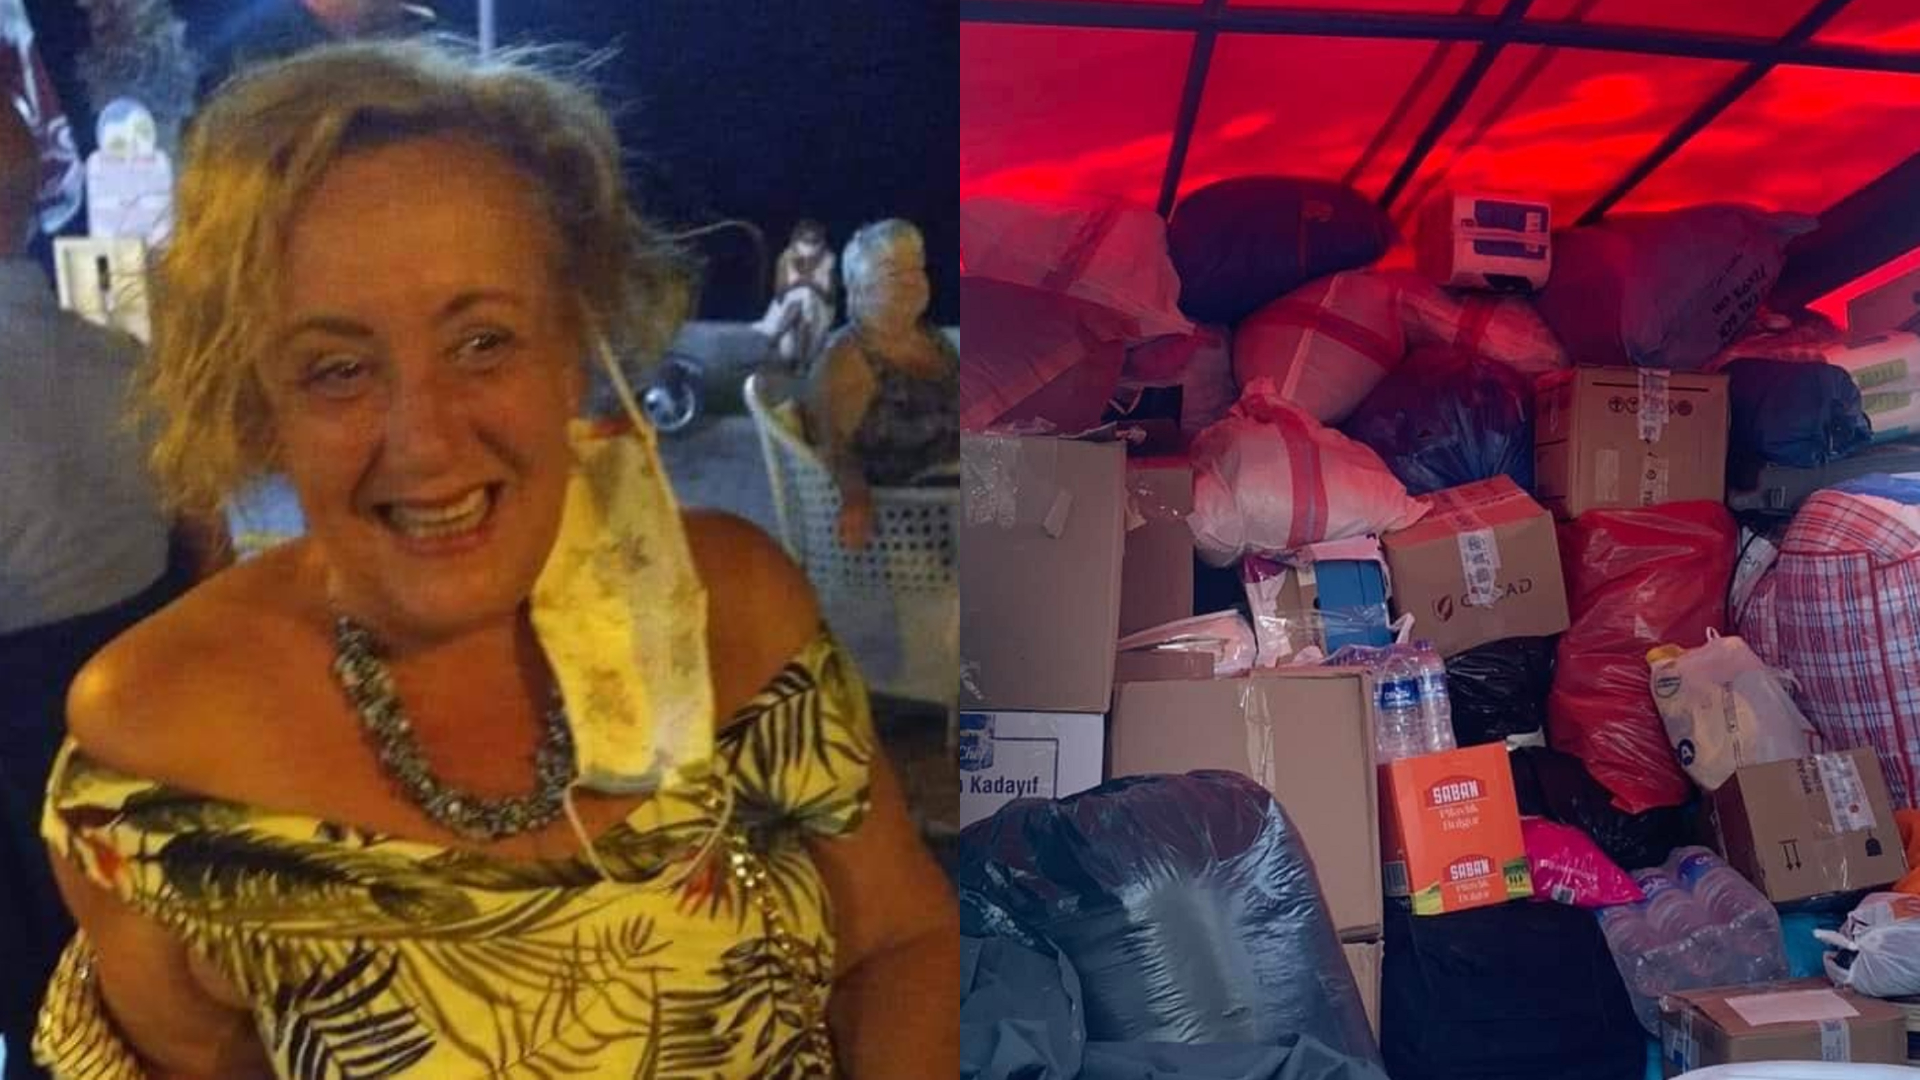 Debs Handy has been helping to coordinate a donation effort for people affected by the earthquake in Turkey